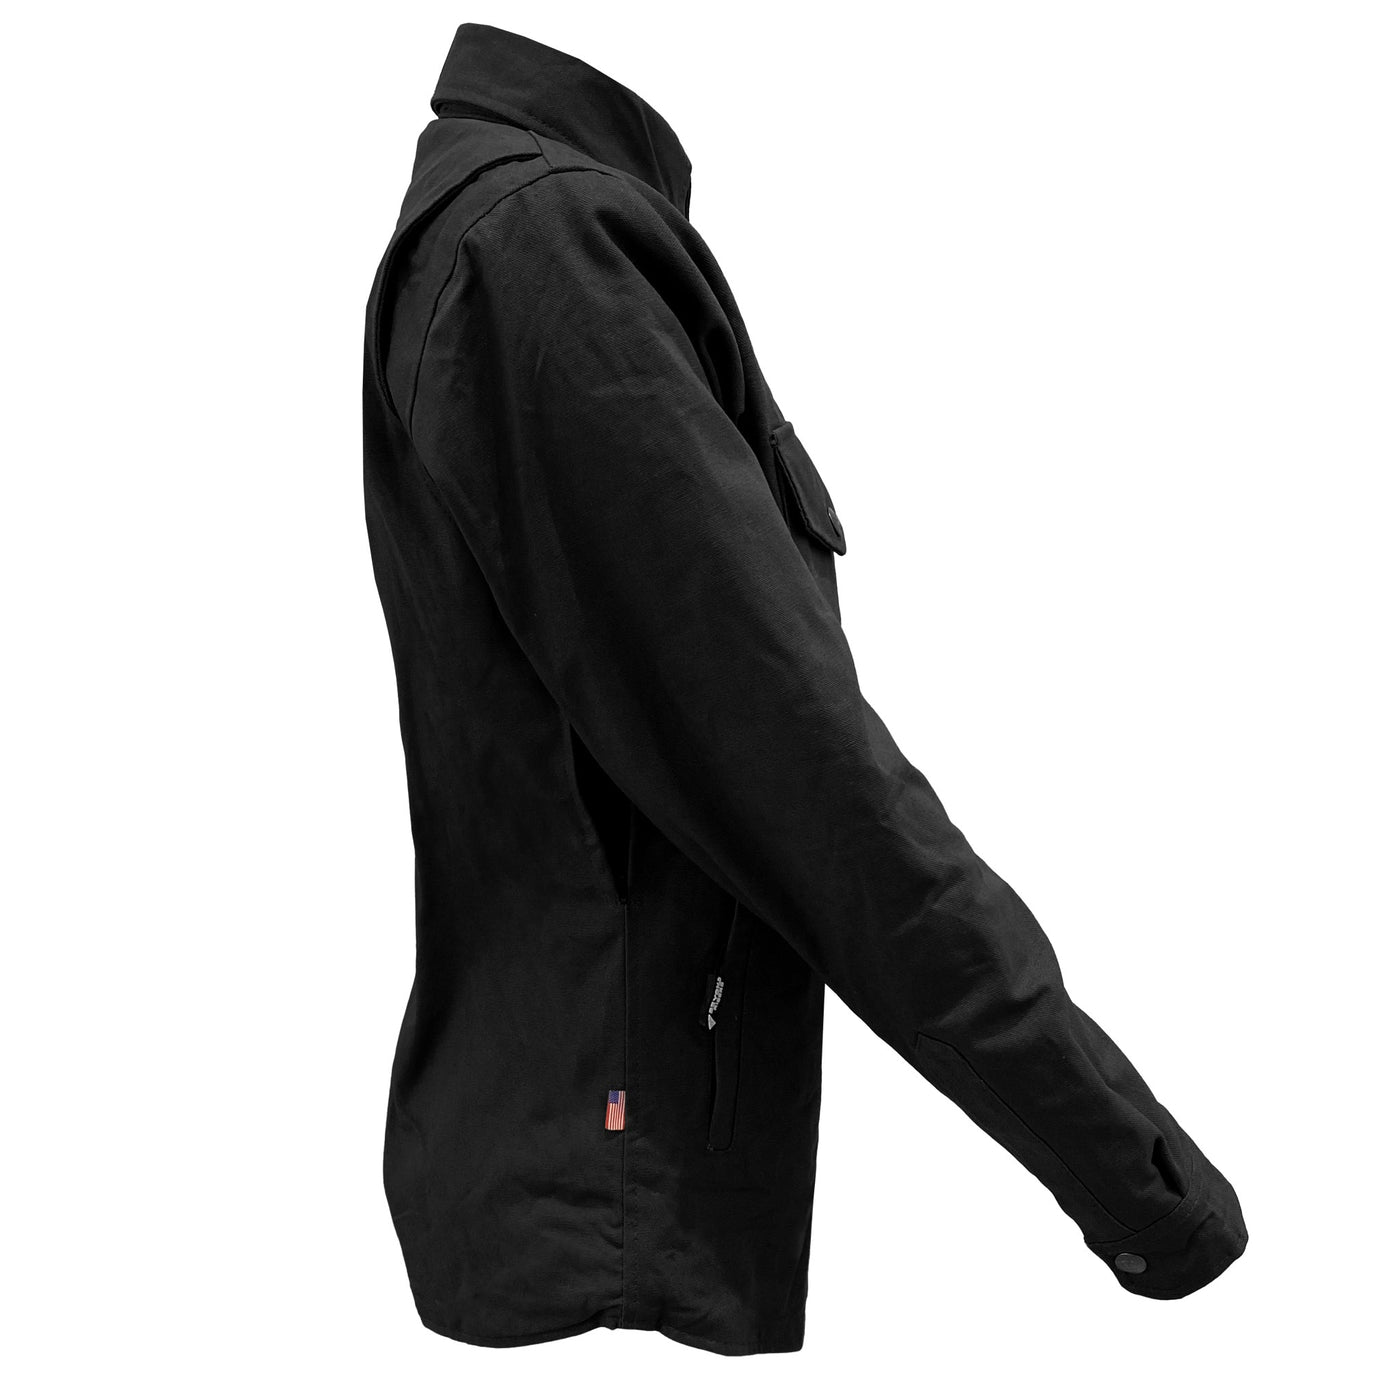 Protective Canvas Jacket with Pads for Women - Black